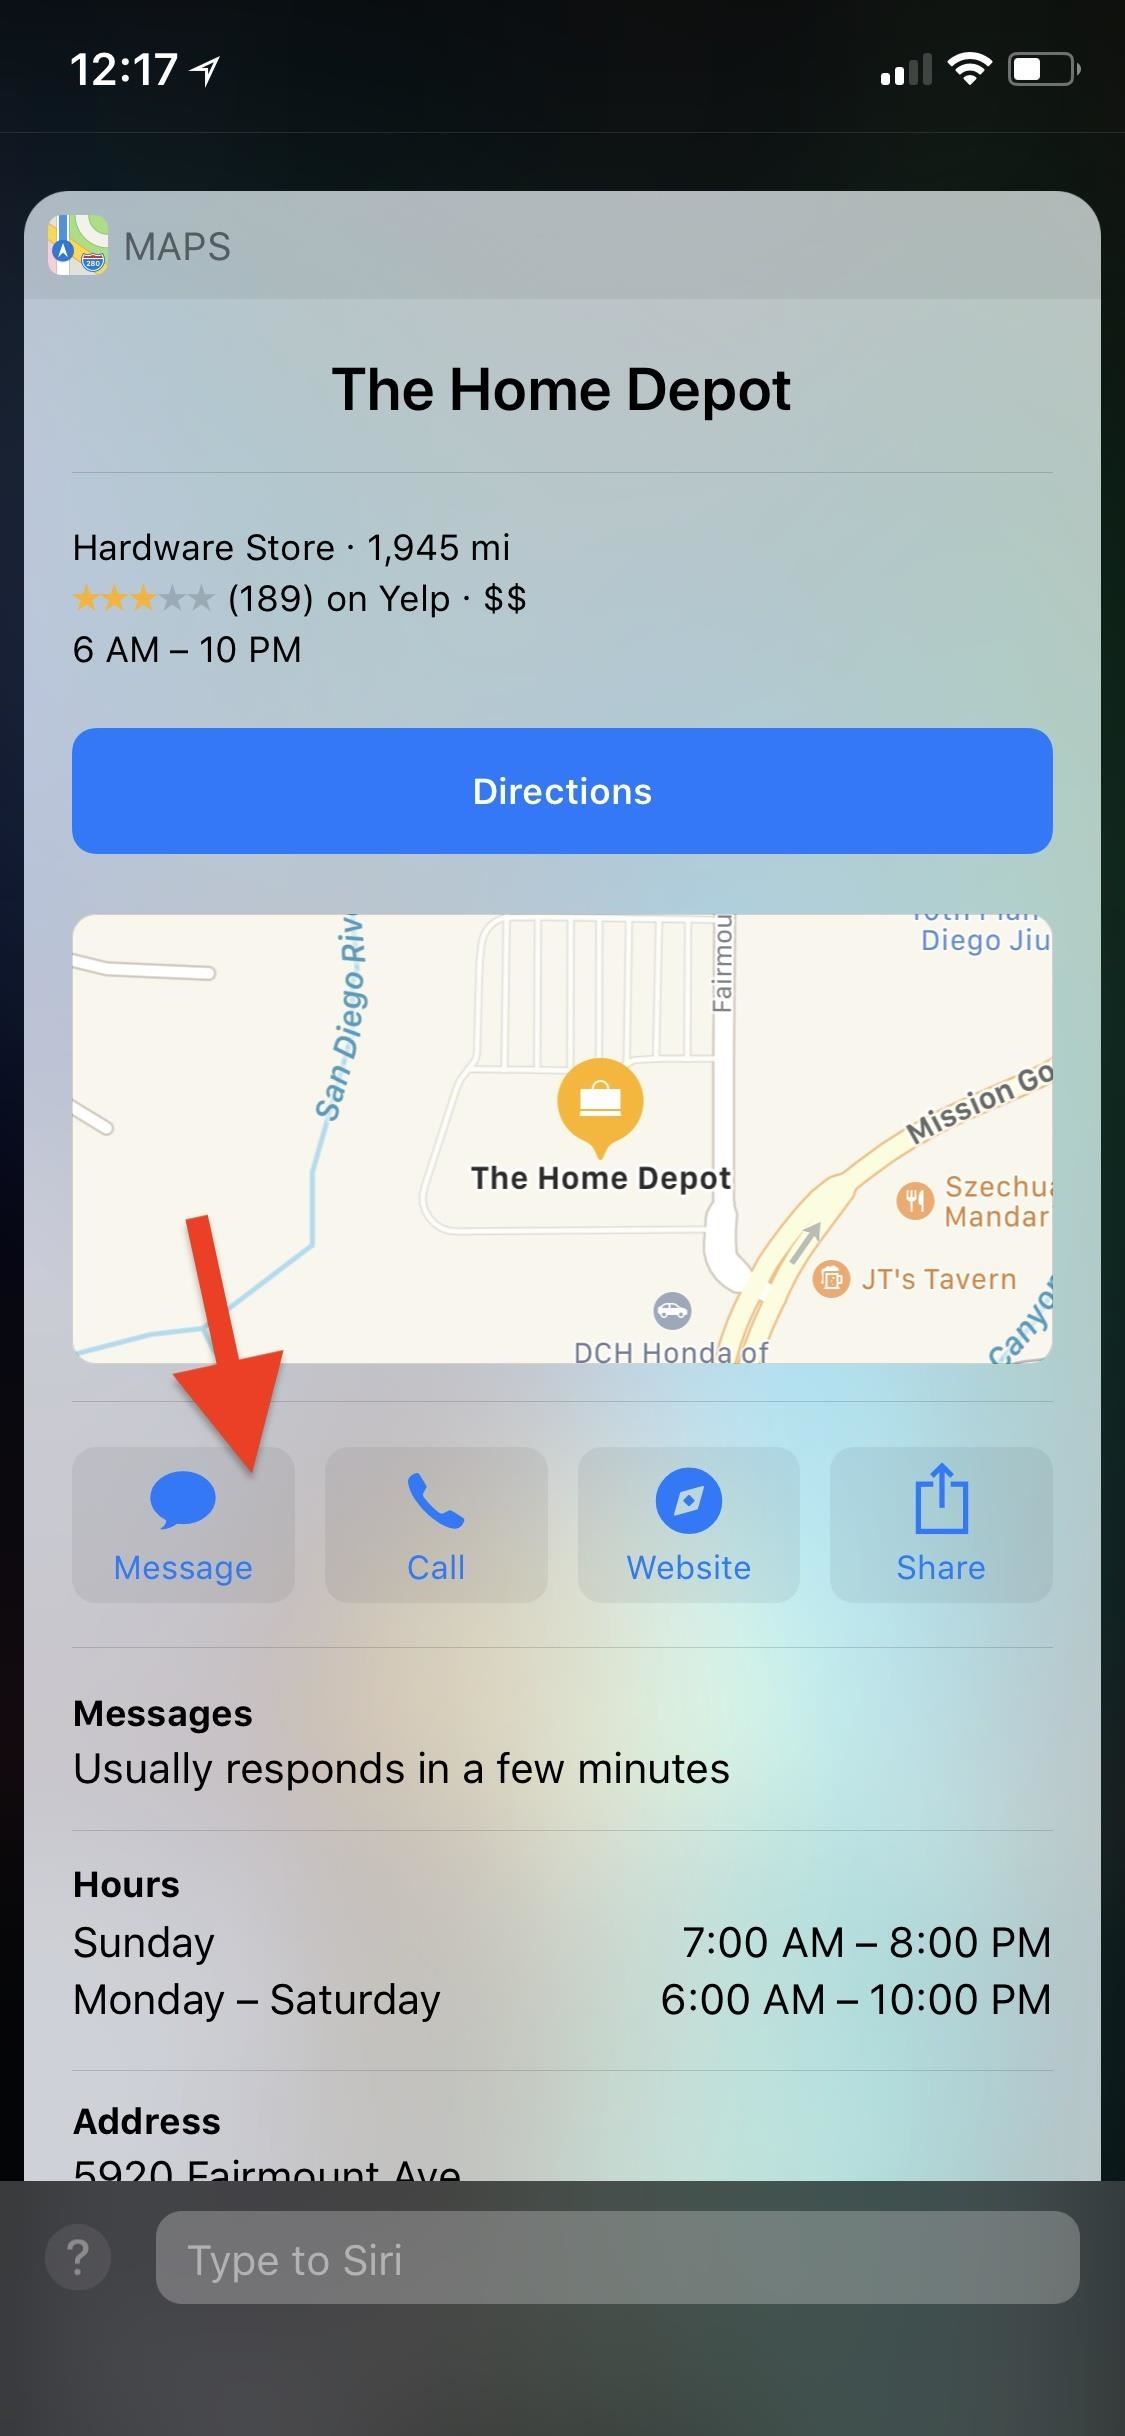 How to Use Business Chat on Your iPhone to Securely Interact with Companies via iMessage